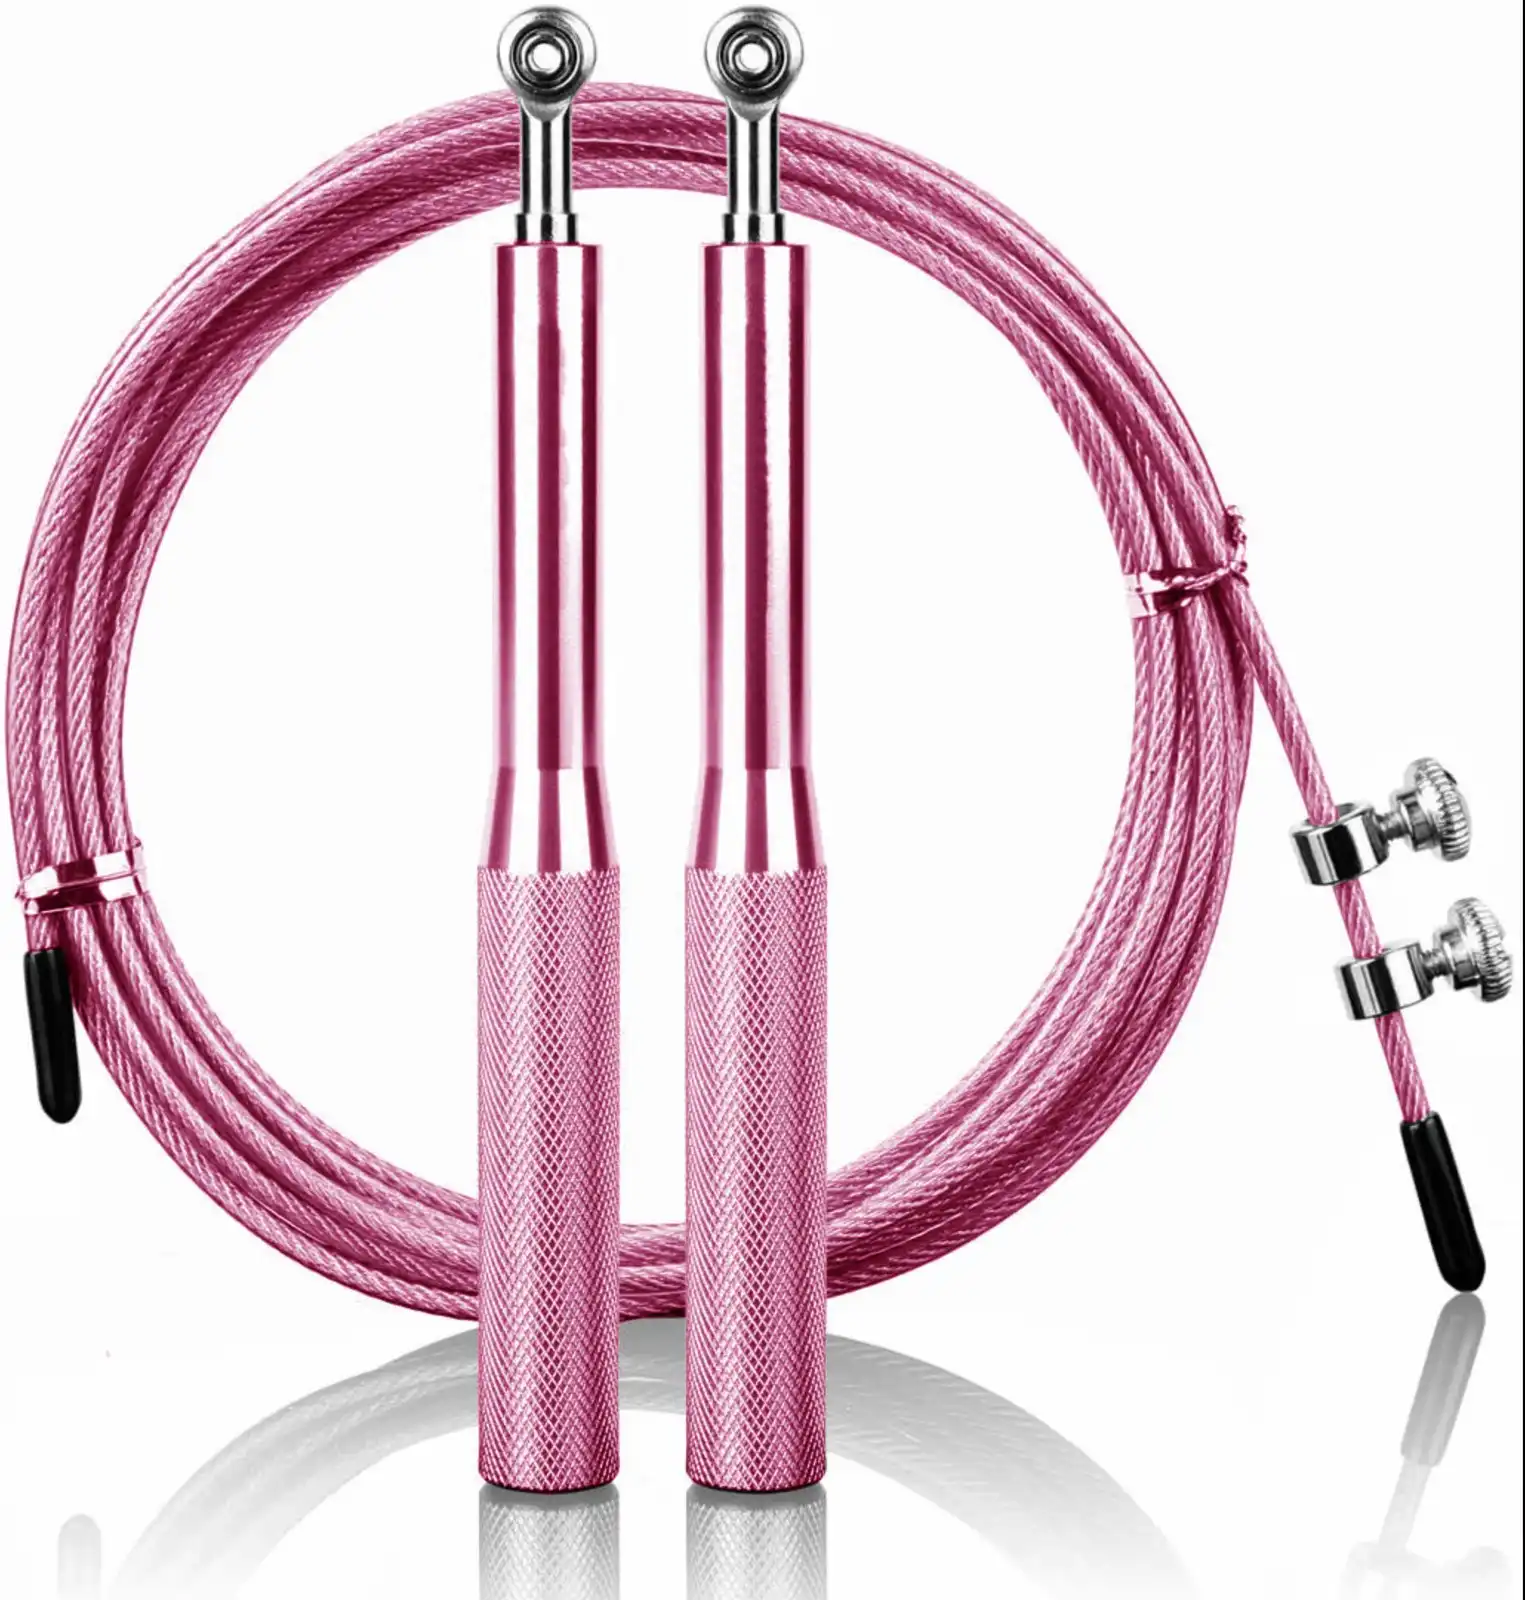 TODO Speed Ball Bearing Jump Rope w/ Anti Slip Handles Fitness Workout Exercise Boxing - Pink